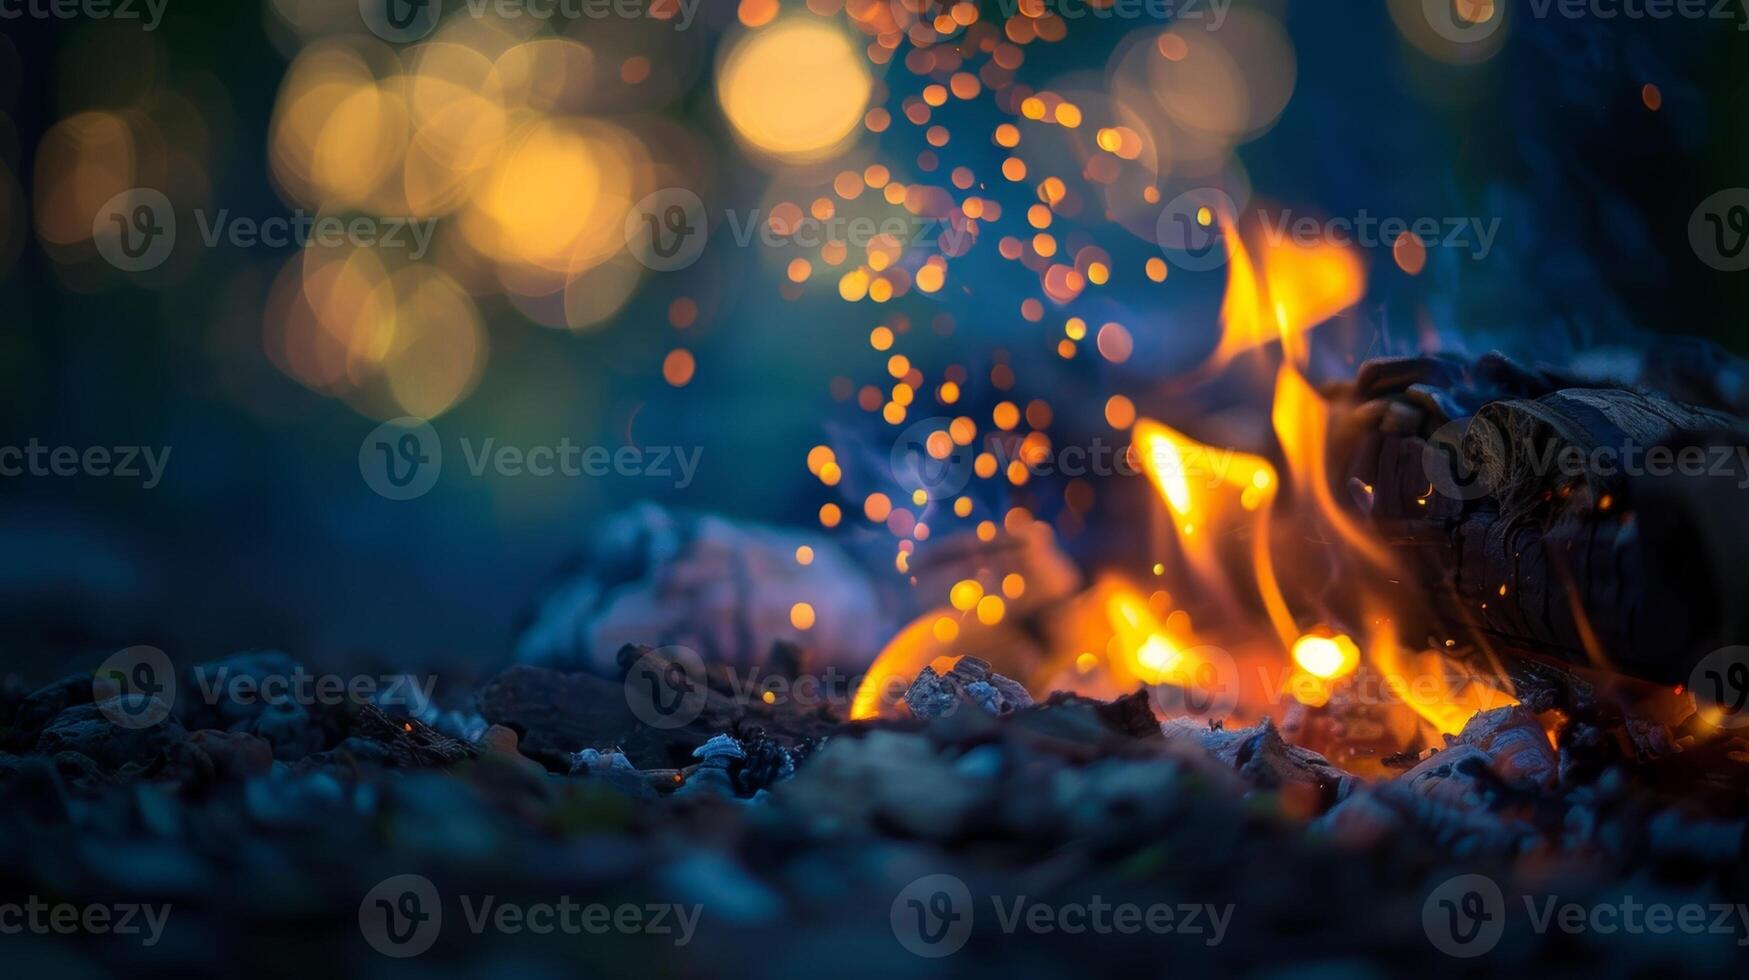 The flames of the fire seem to dance in tune with the stories adding an additional element of magic to the evening. 2d flat cartoon photo